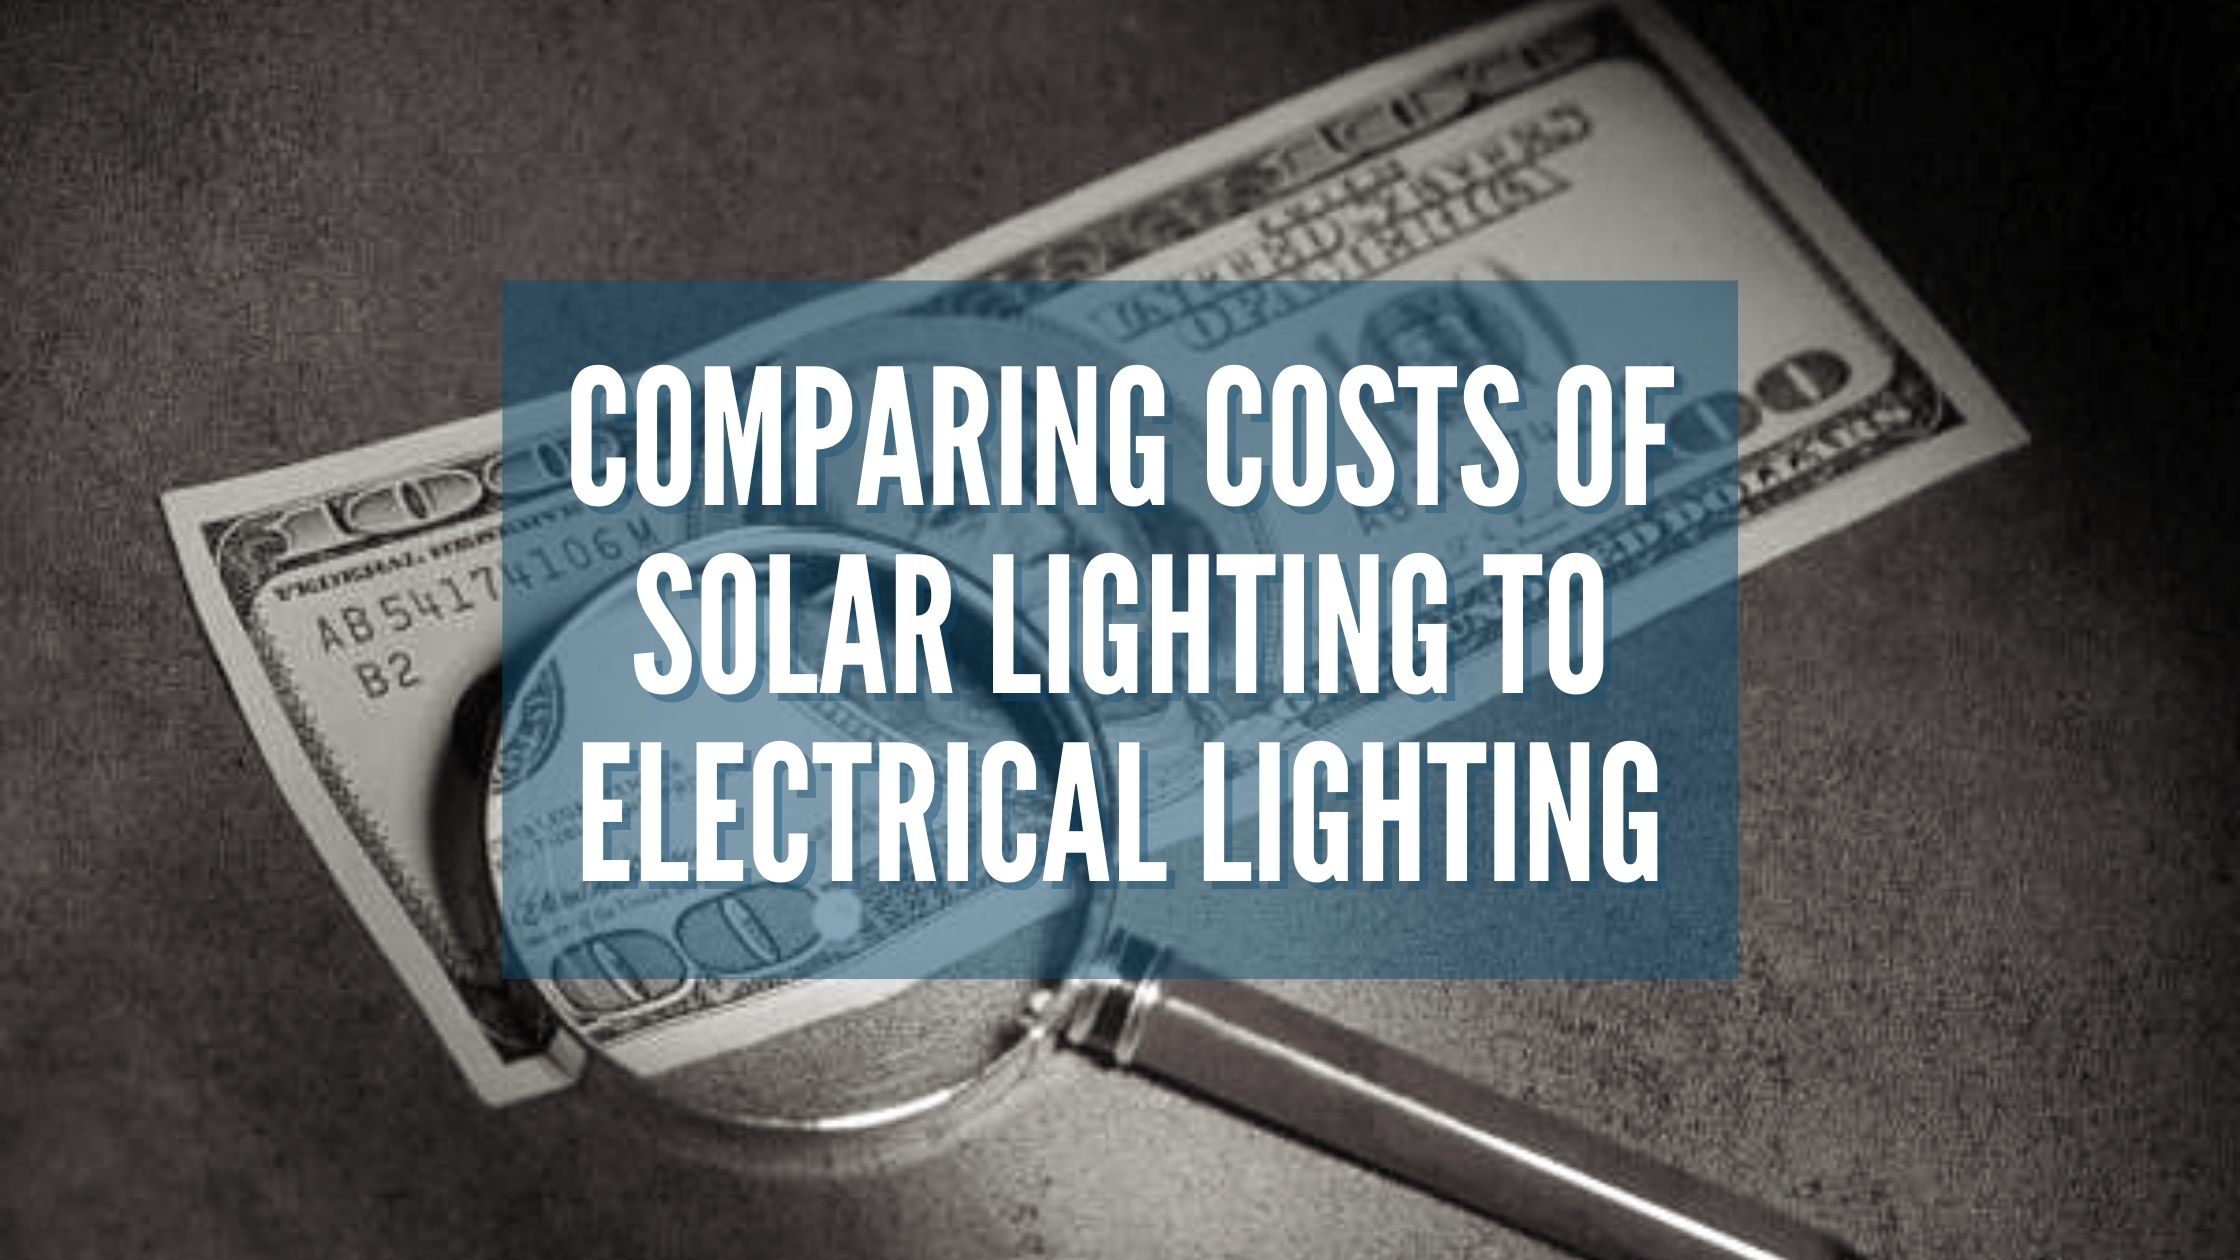 Comparing Costs of Solar Lighting to Electrical Lighting